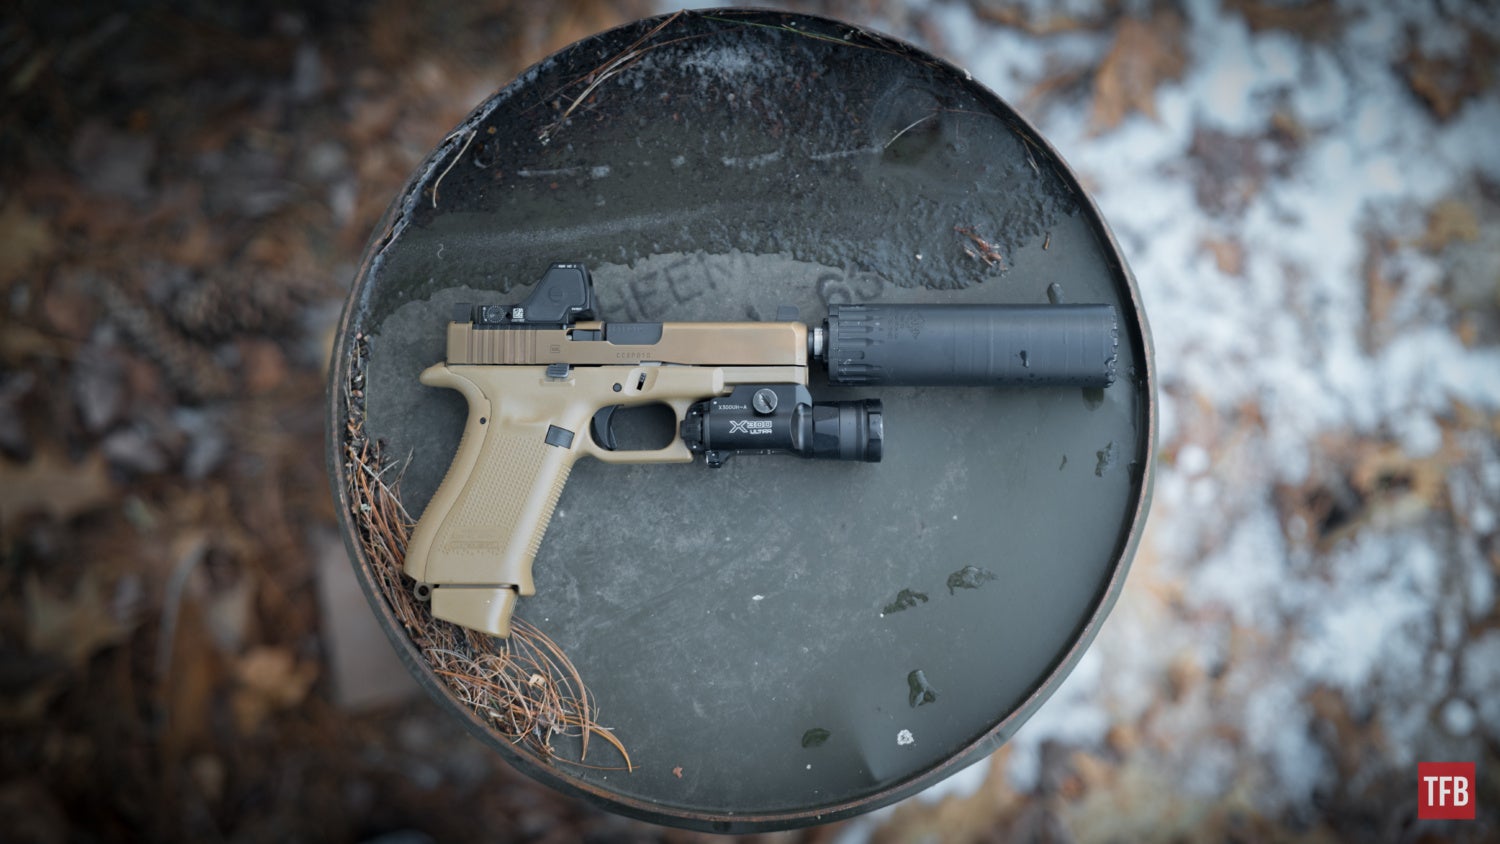 SILENCER SATURDAY #316: GLOCK Suppressor Host - The Exclusive G19X MOS